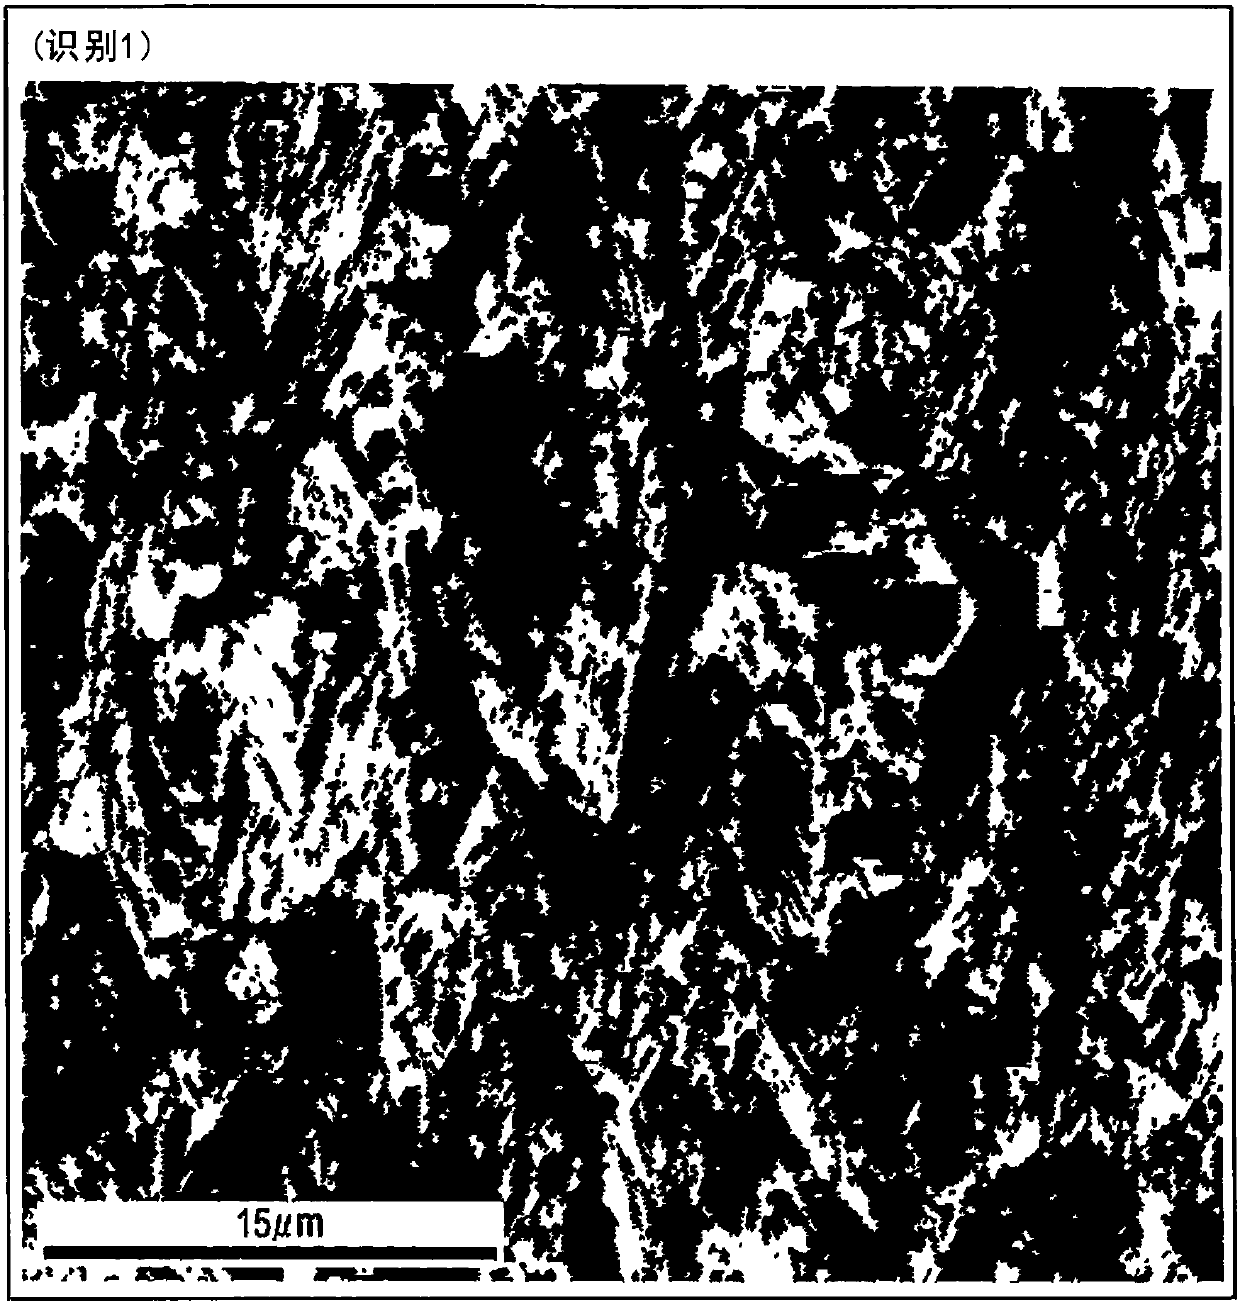 Metastable austenitic stainless steel band or sheet and manufacturing method therefor